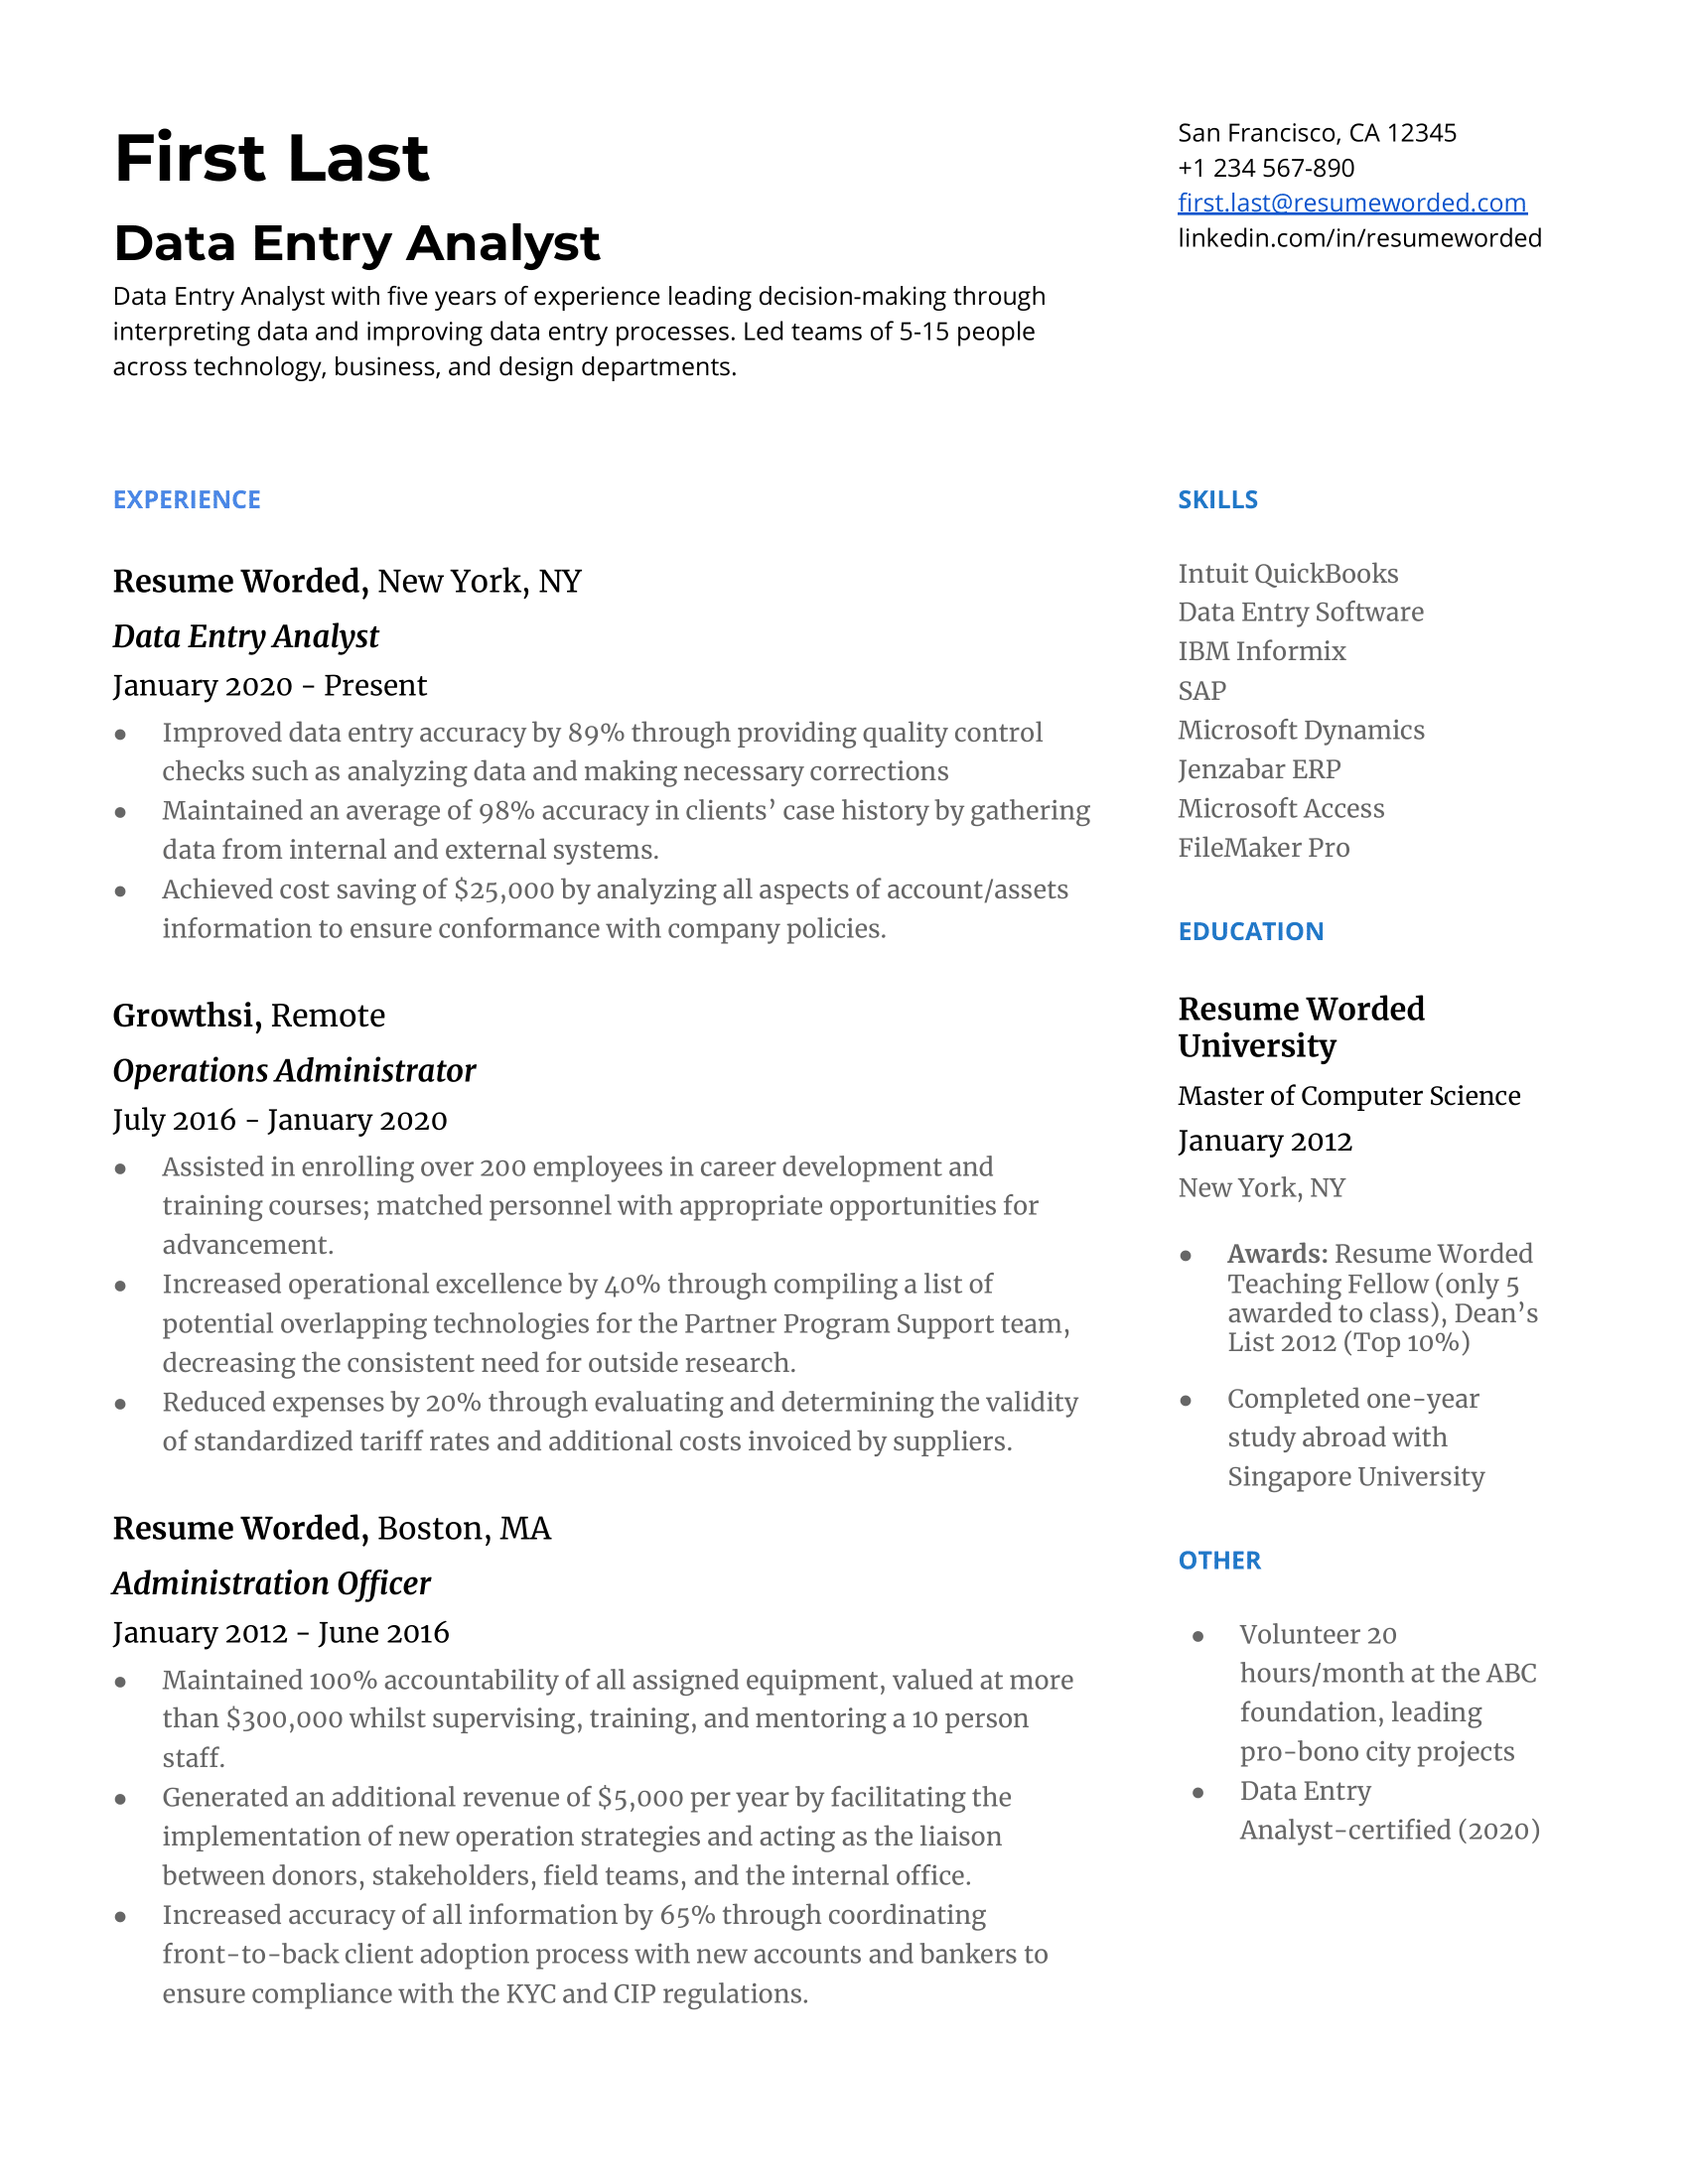 Data Entry resume showcasing typing speed and software expertise